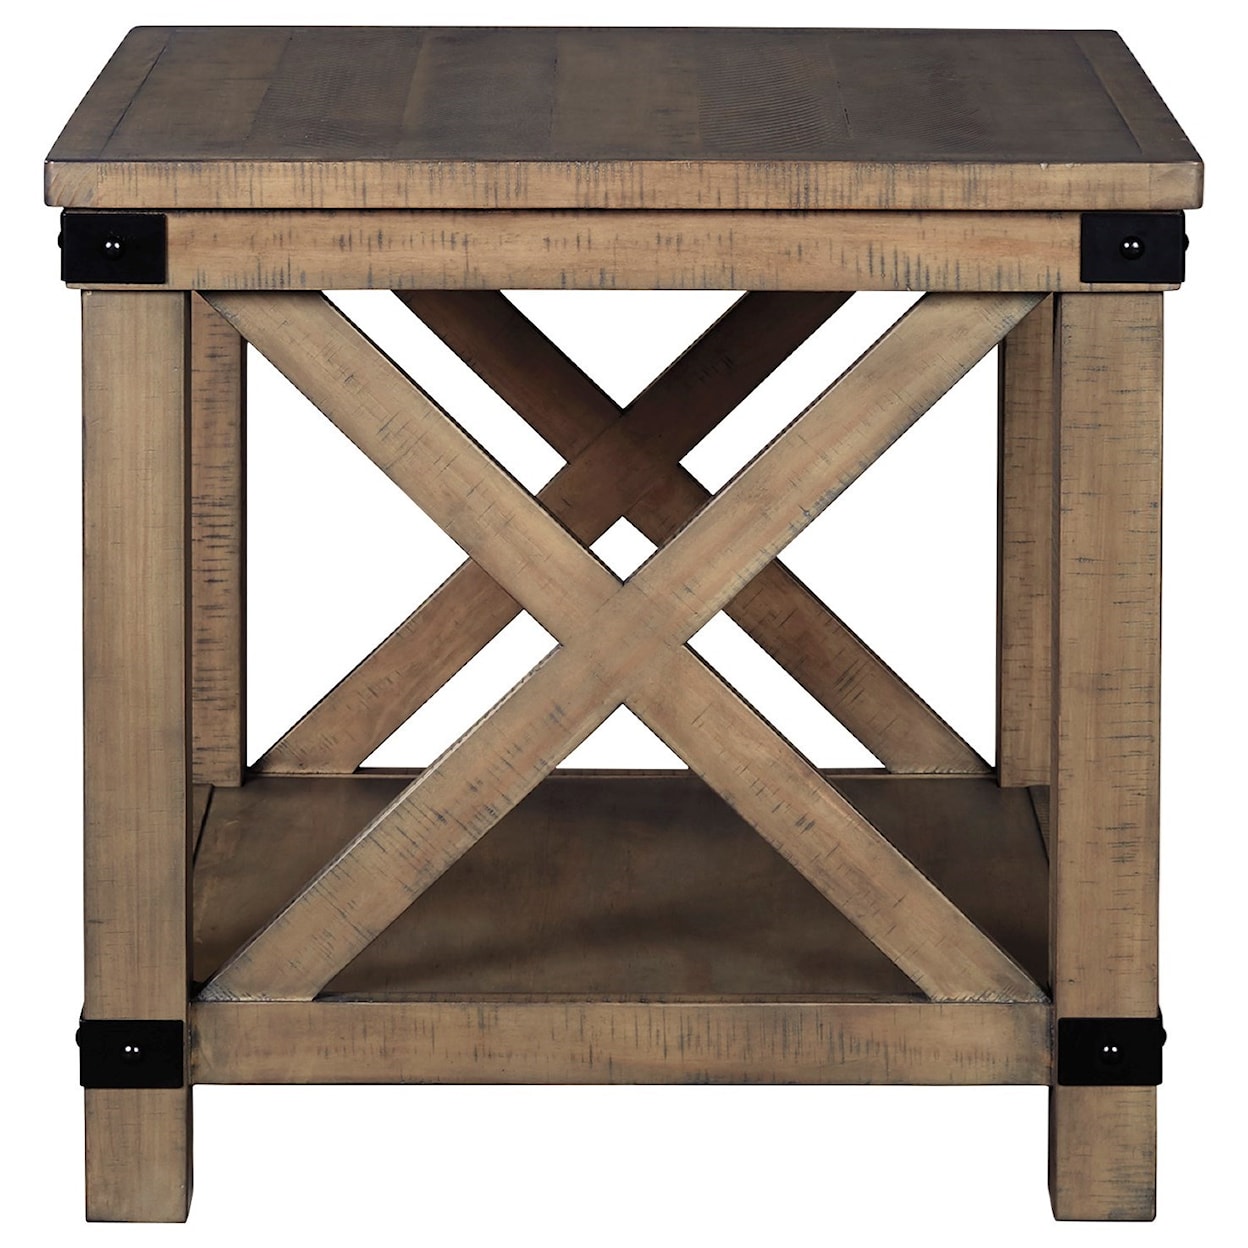 Signature Design by Ashley Neil End Table